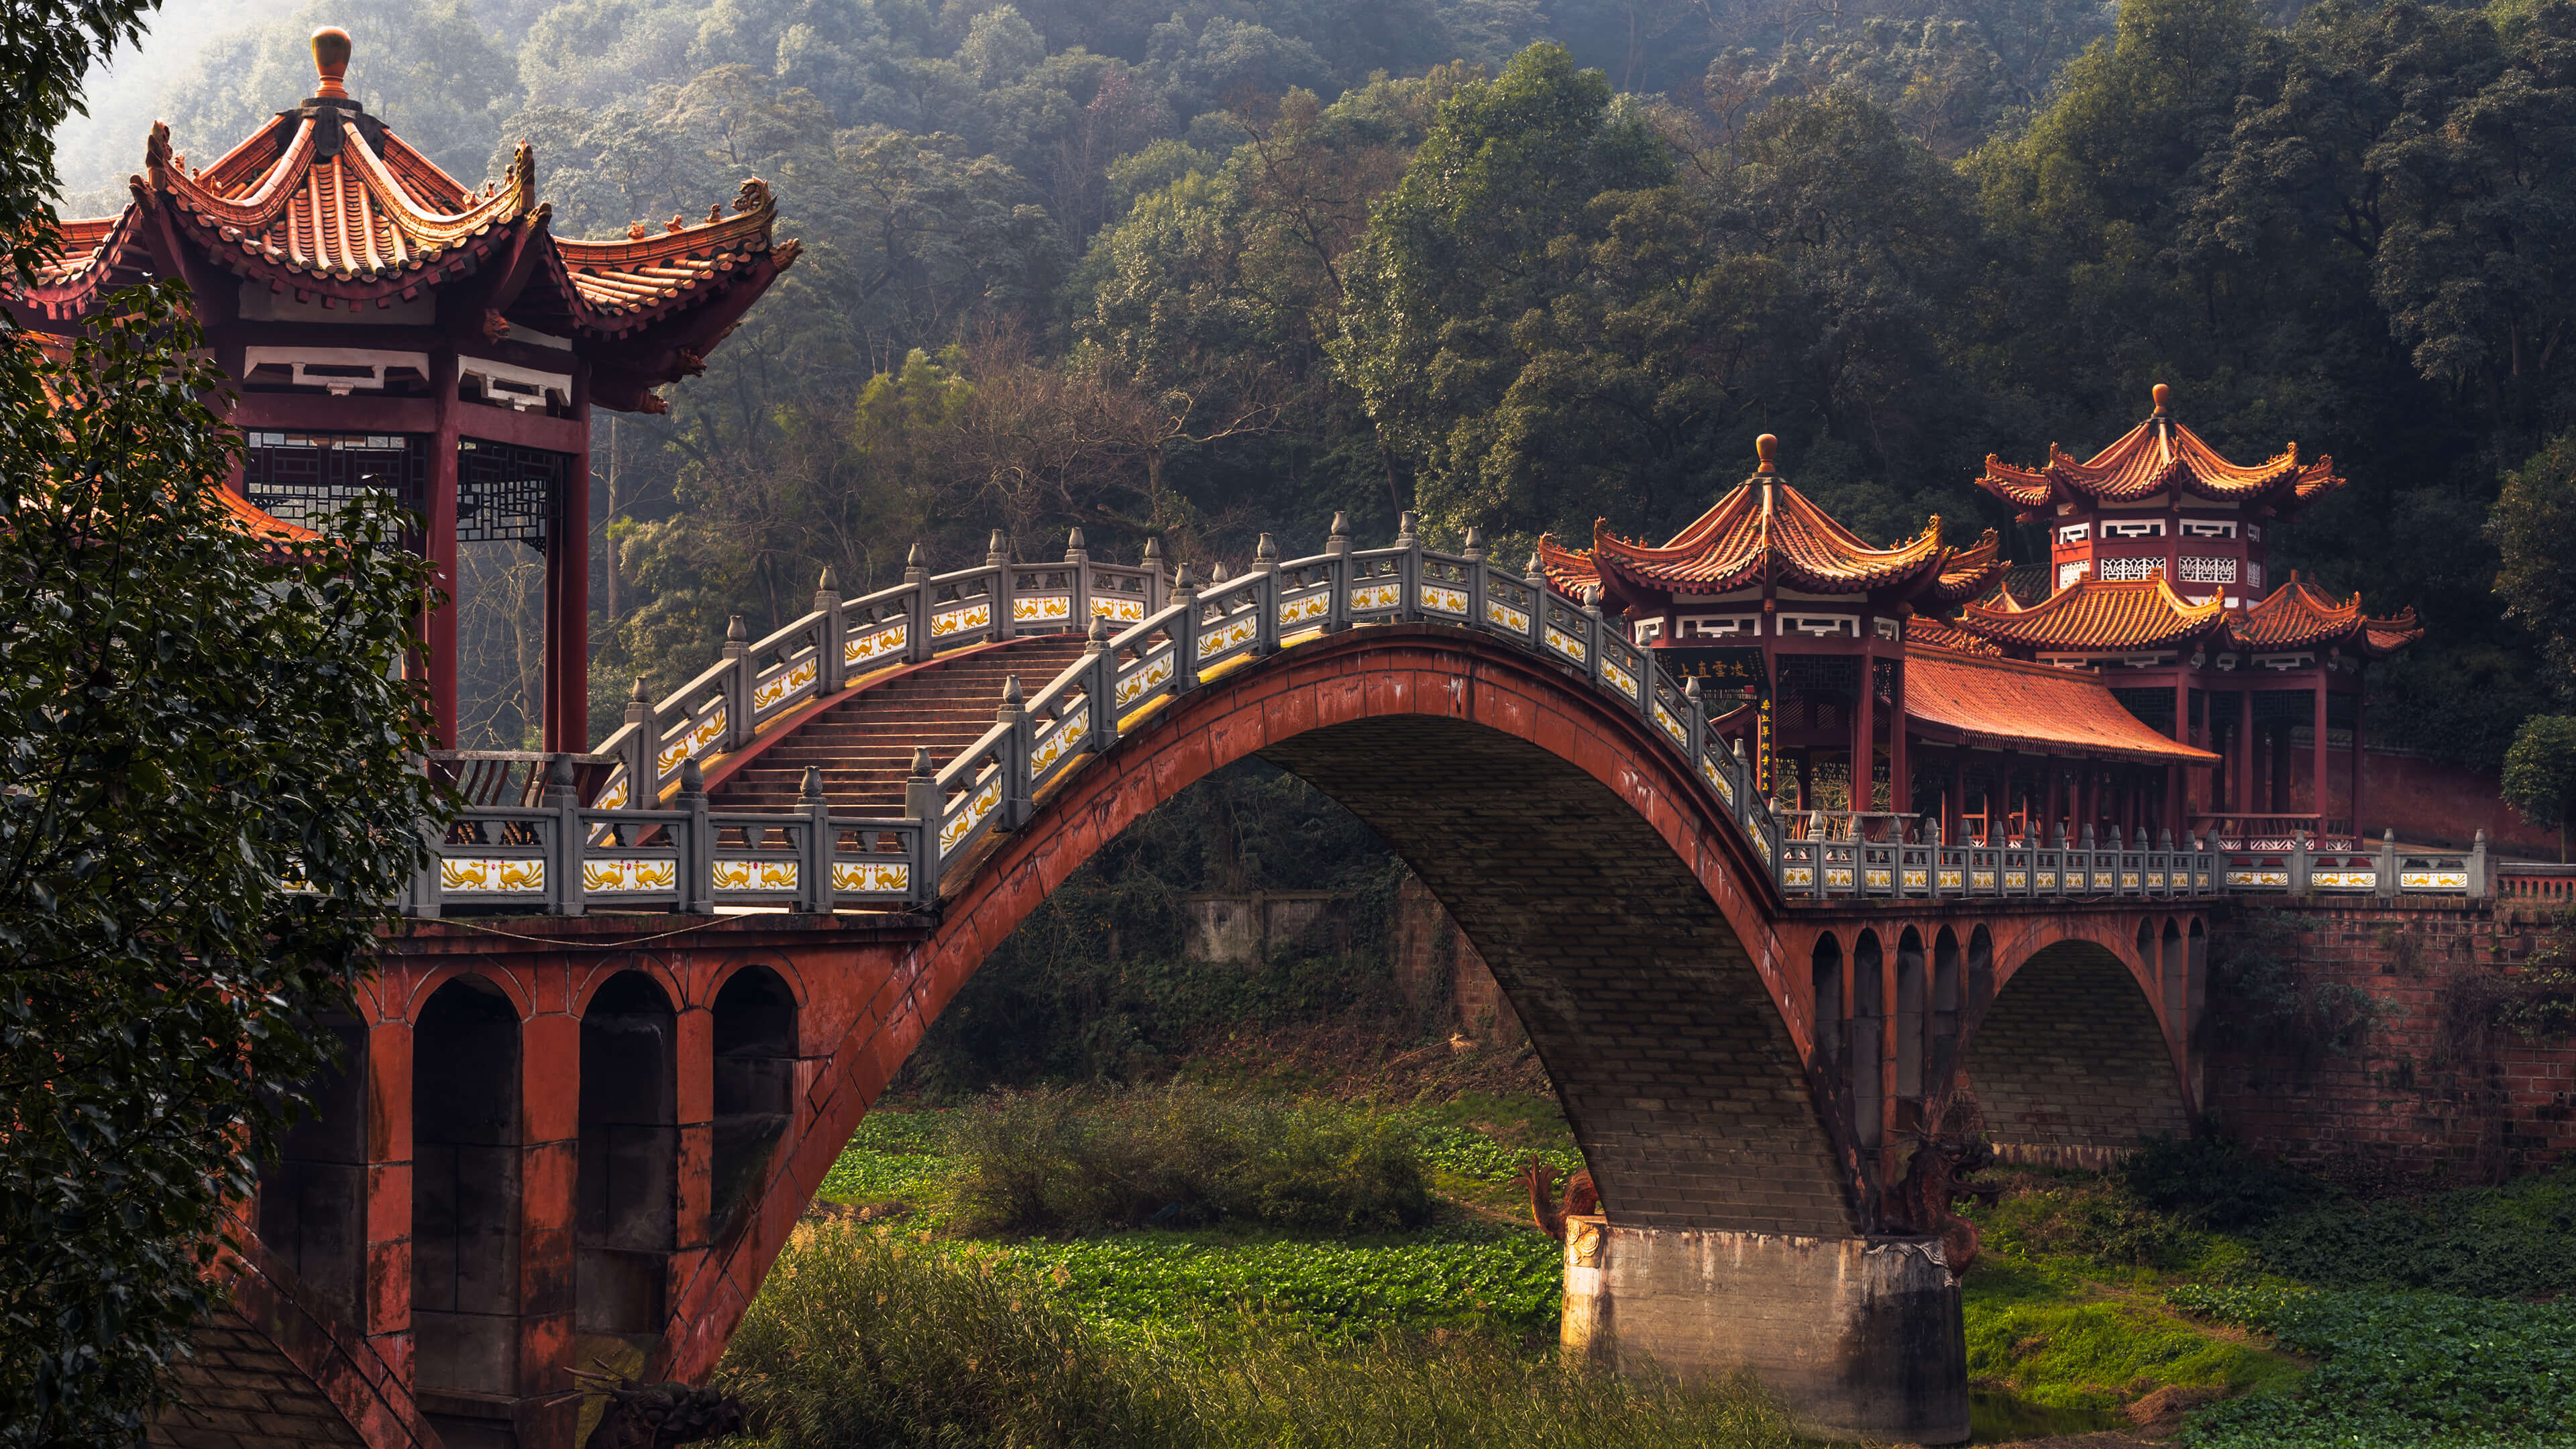 General 3840x2160 China nature bridge forest trees Asian architecture